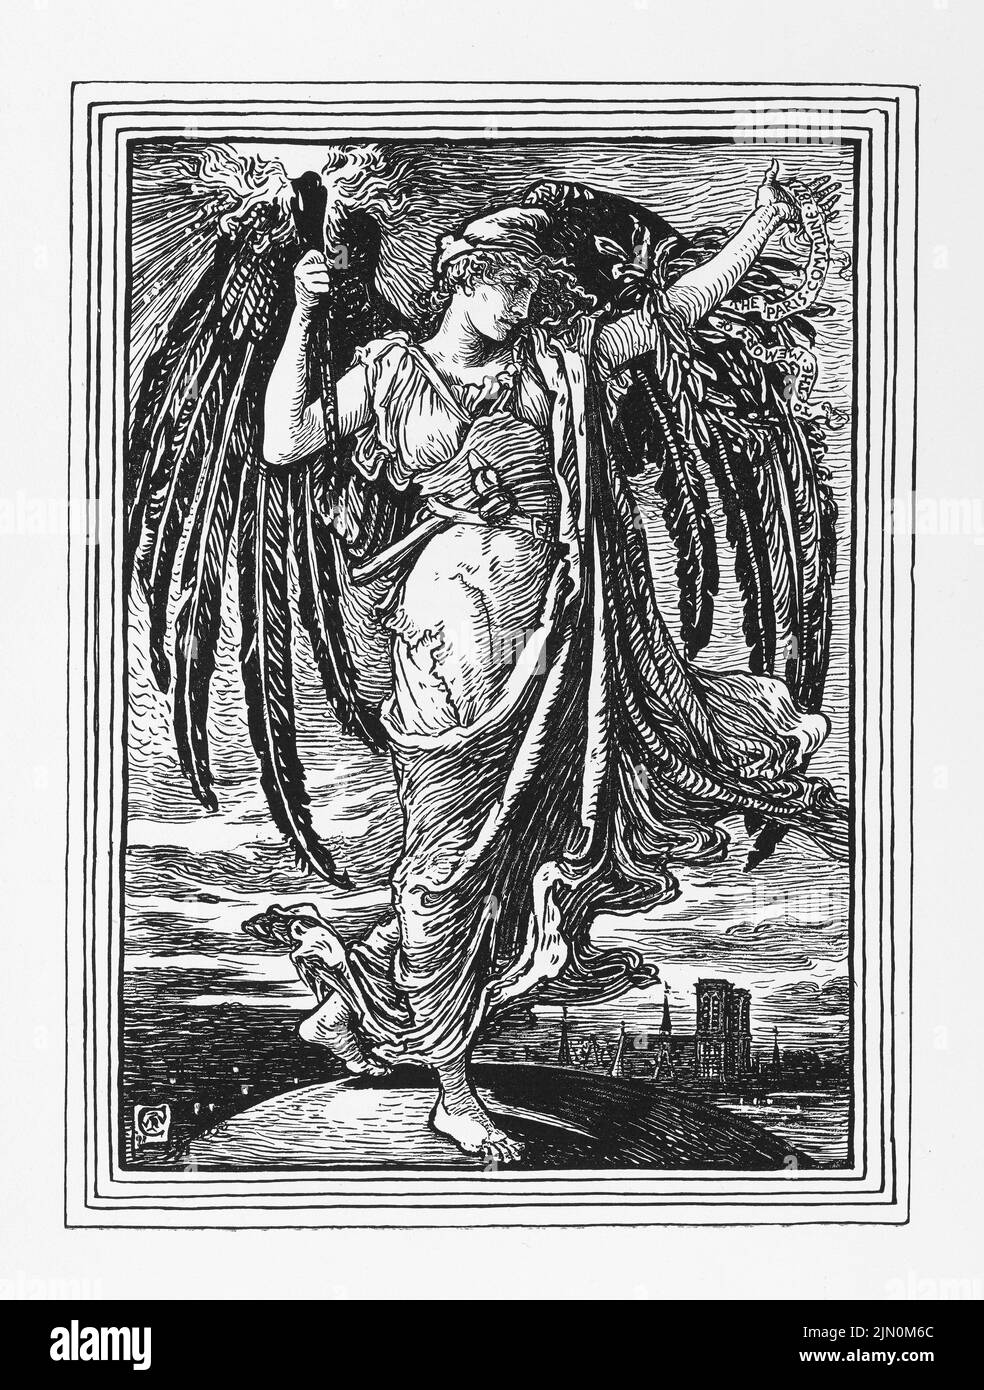 Illustration by Walter Crane from Cartoons for the Cause 1886-1896, International Socialist Workers. Stock Photo